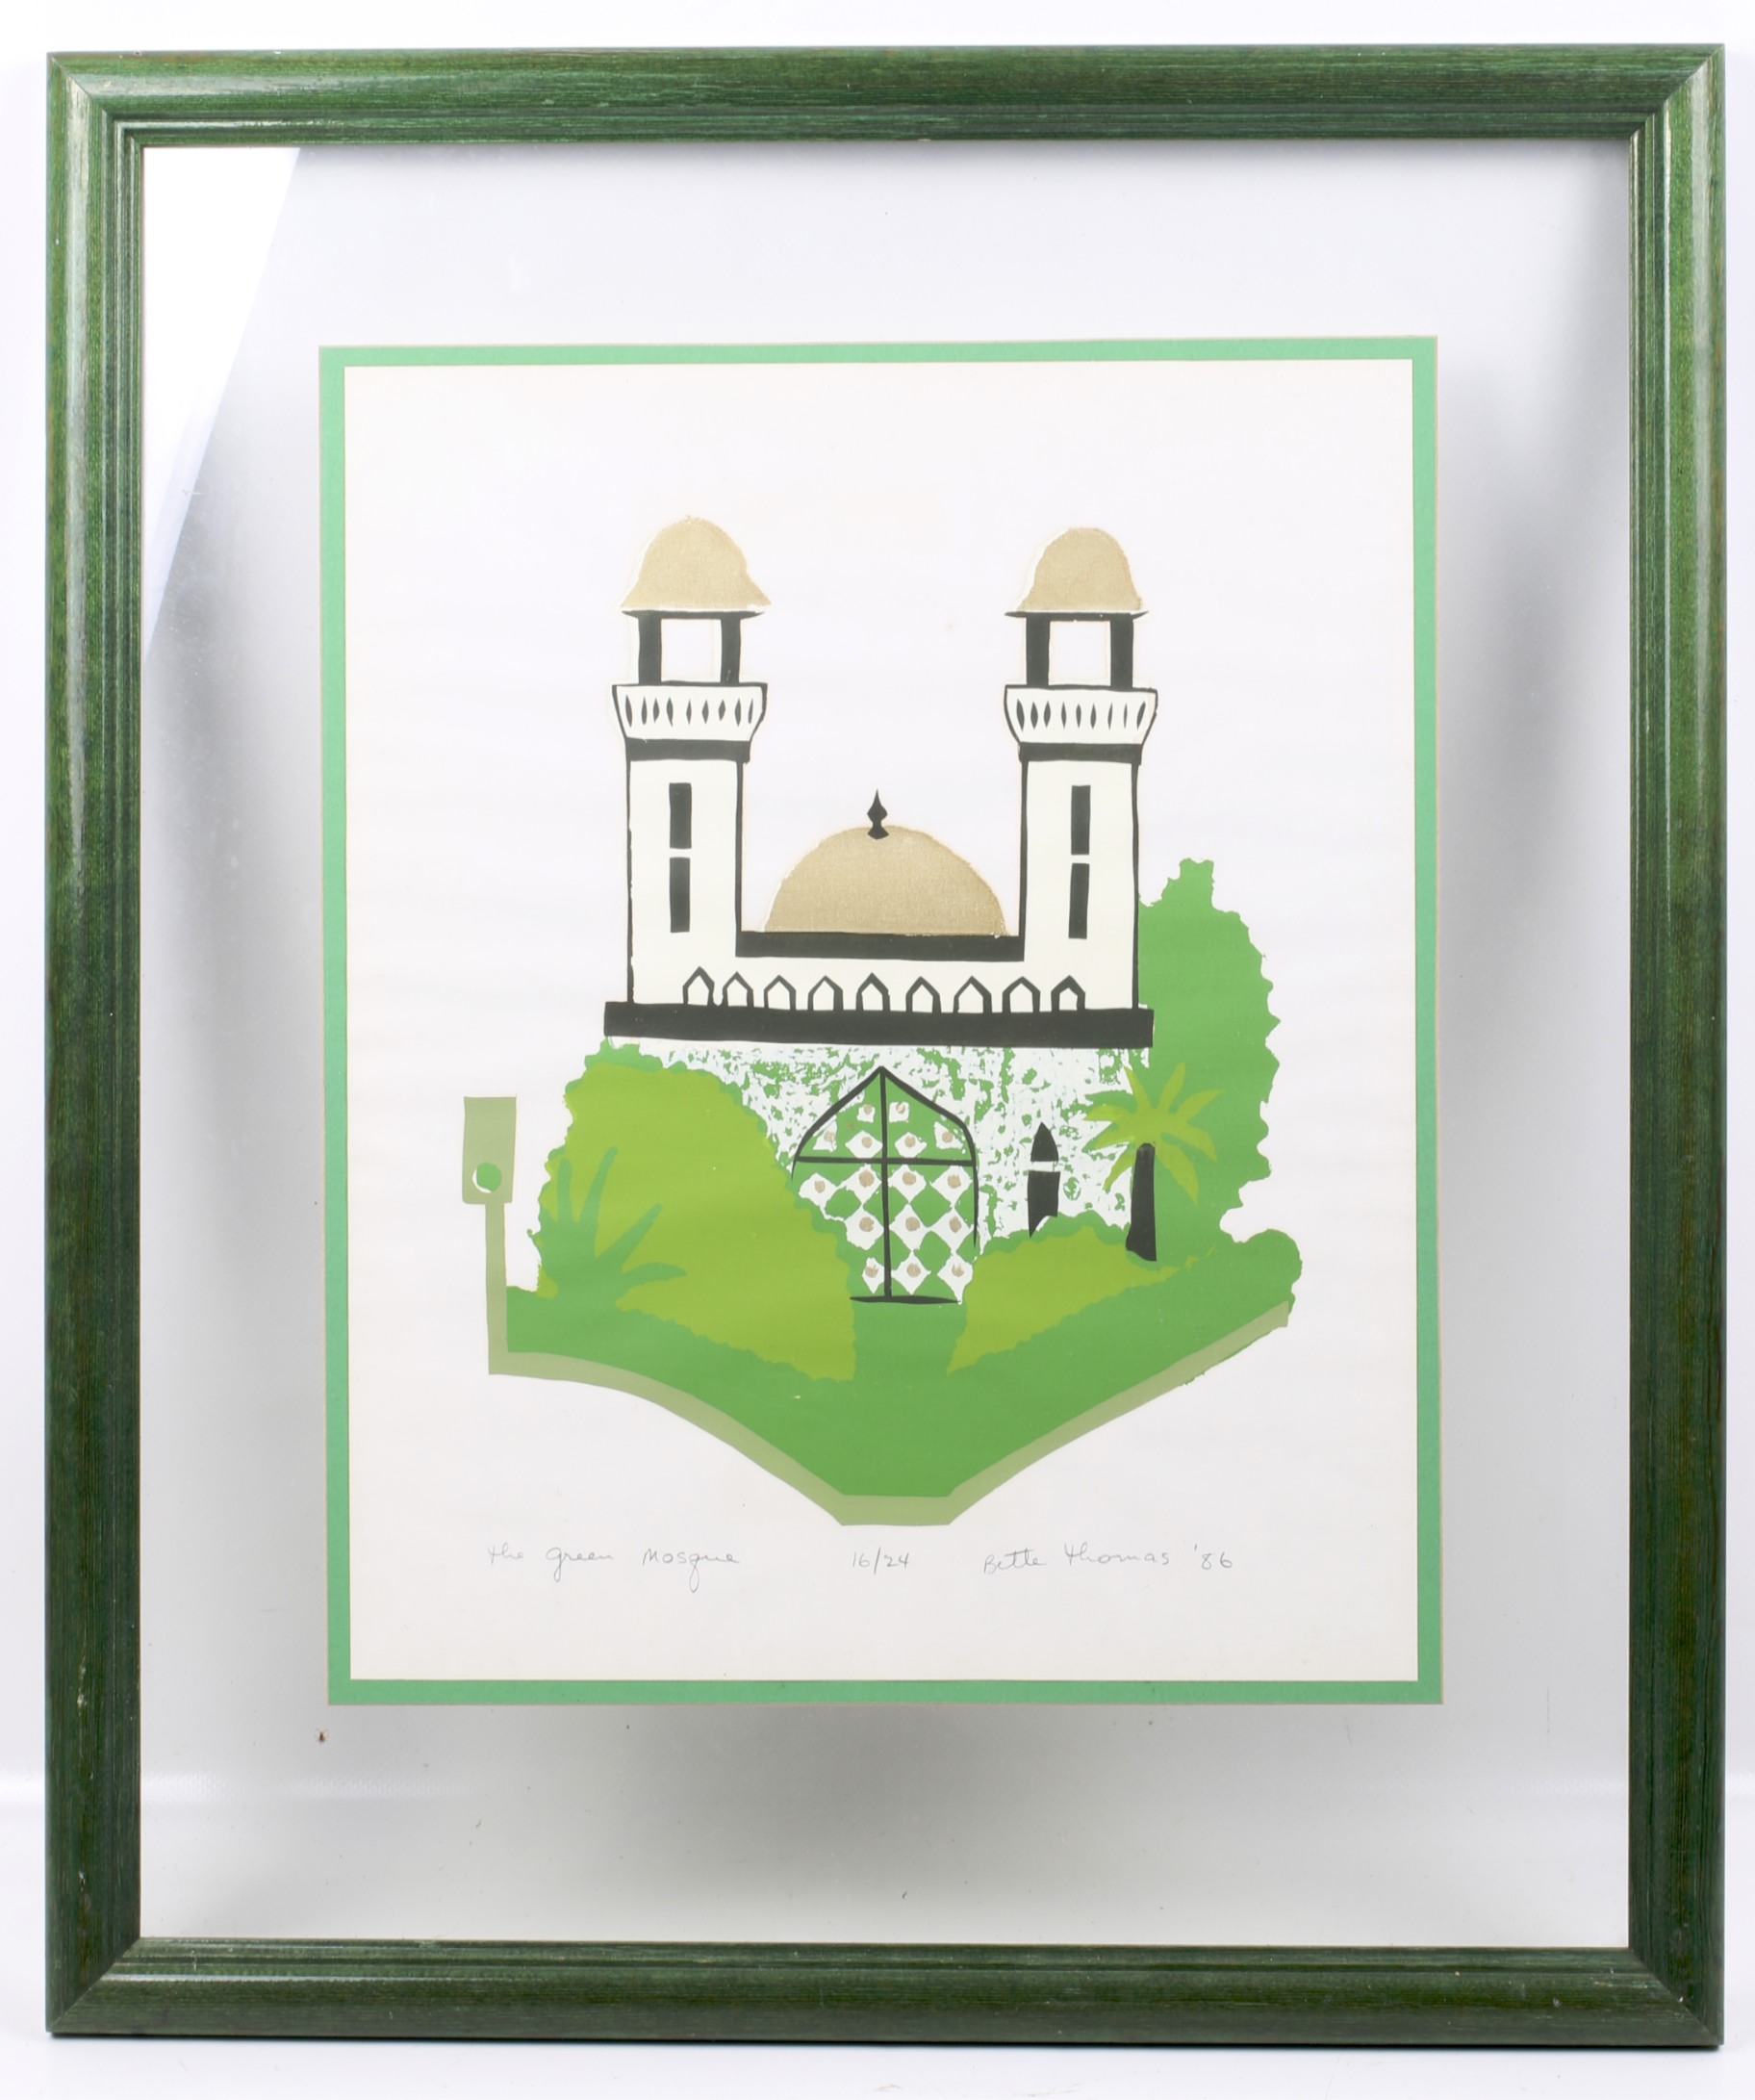 Bette Thomas, limited edition signed print, 'The Green Mosque'. - Image 2 of 3